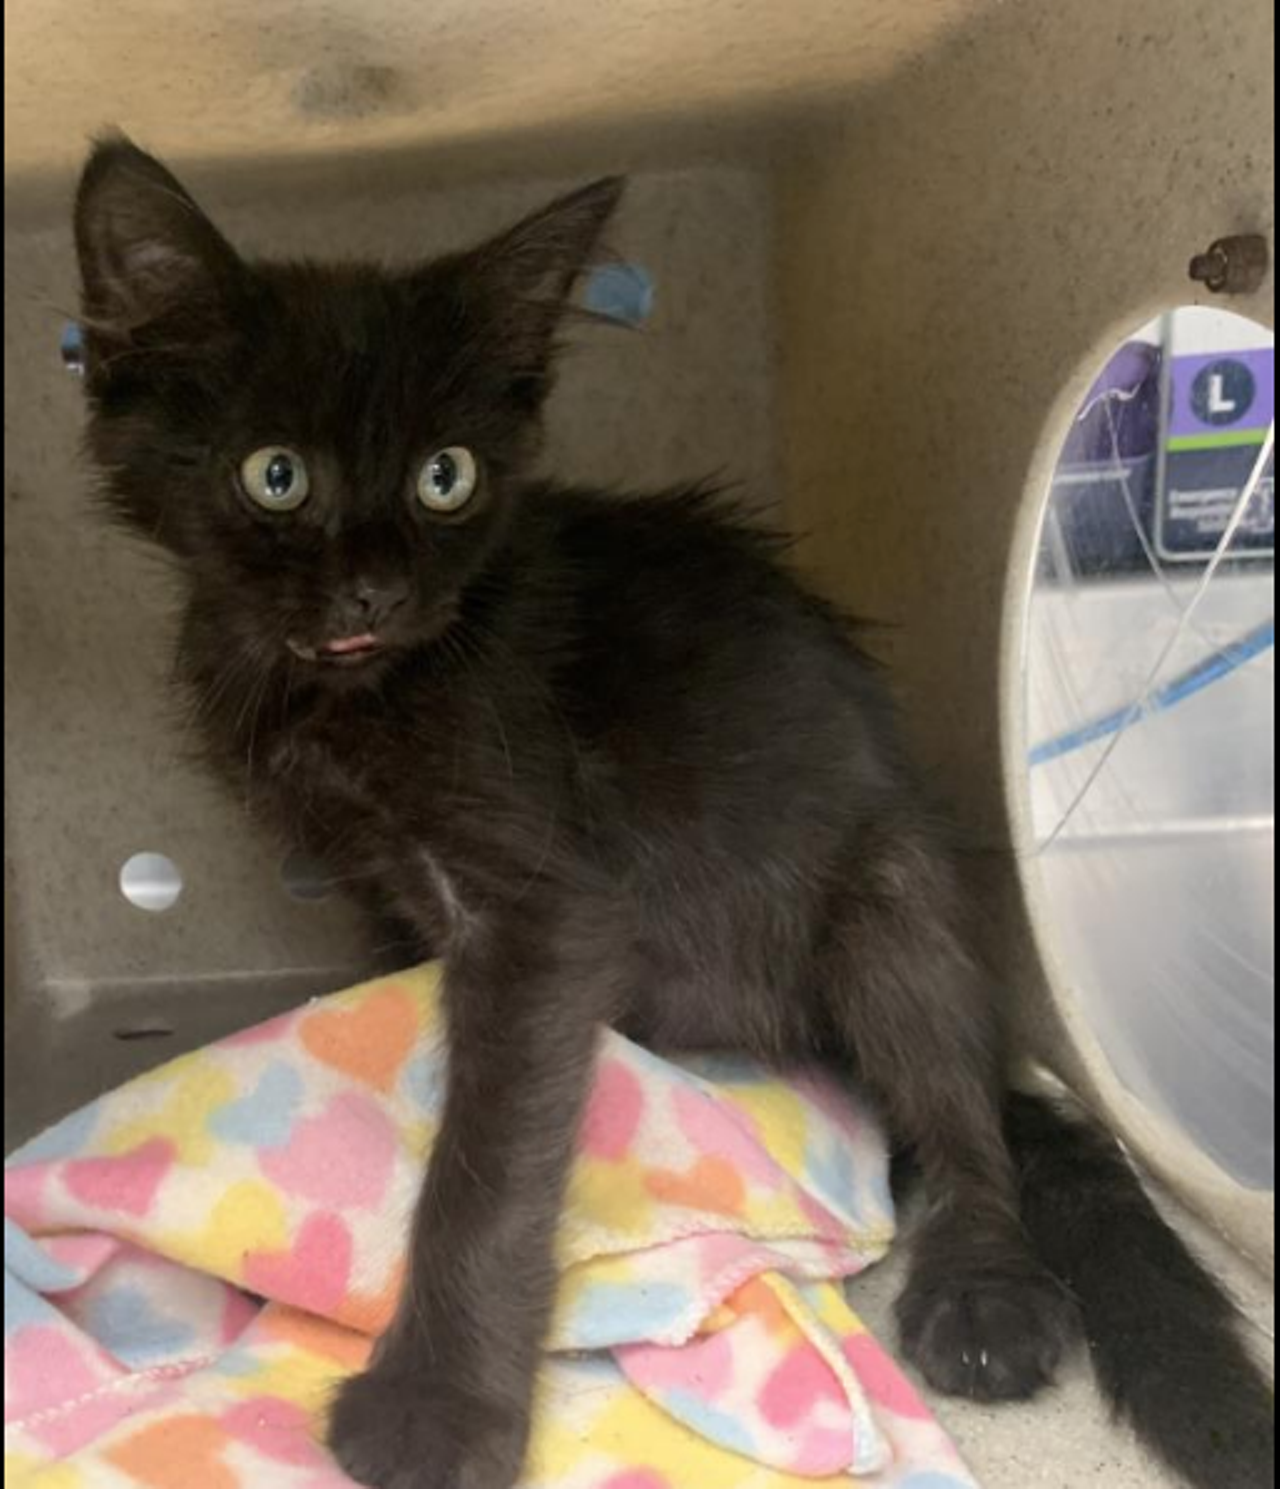 Unnamed, Pet ID A608600